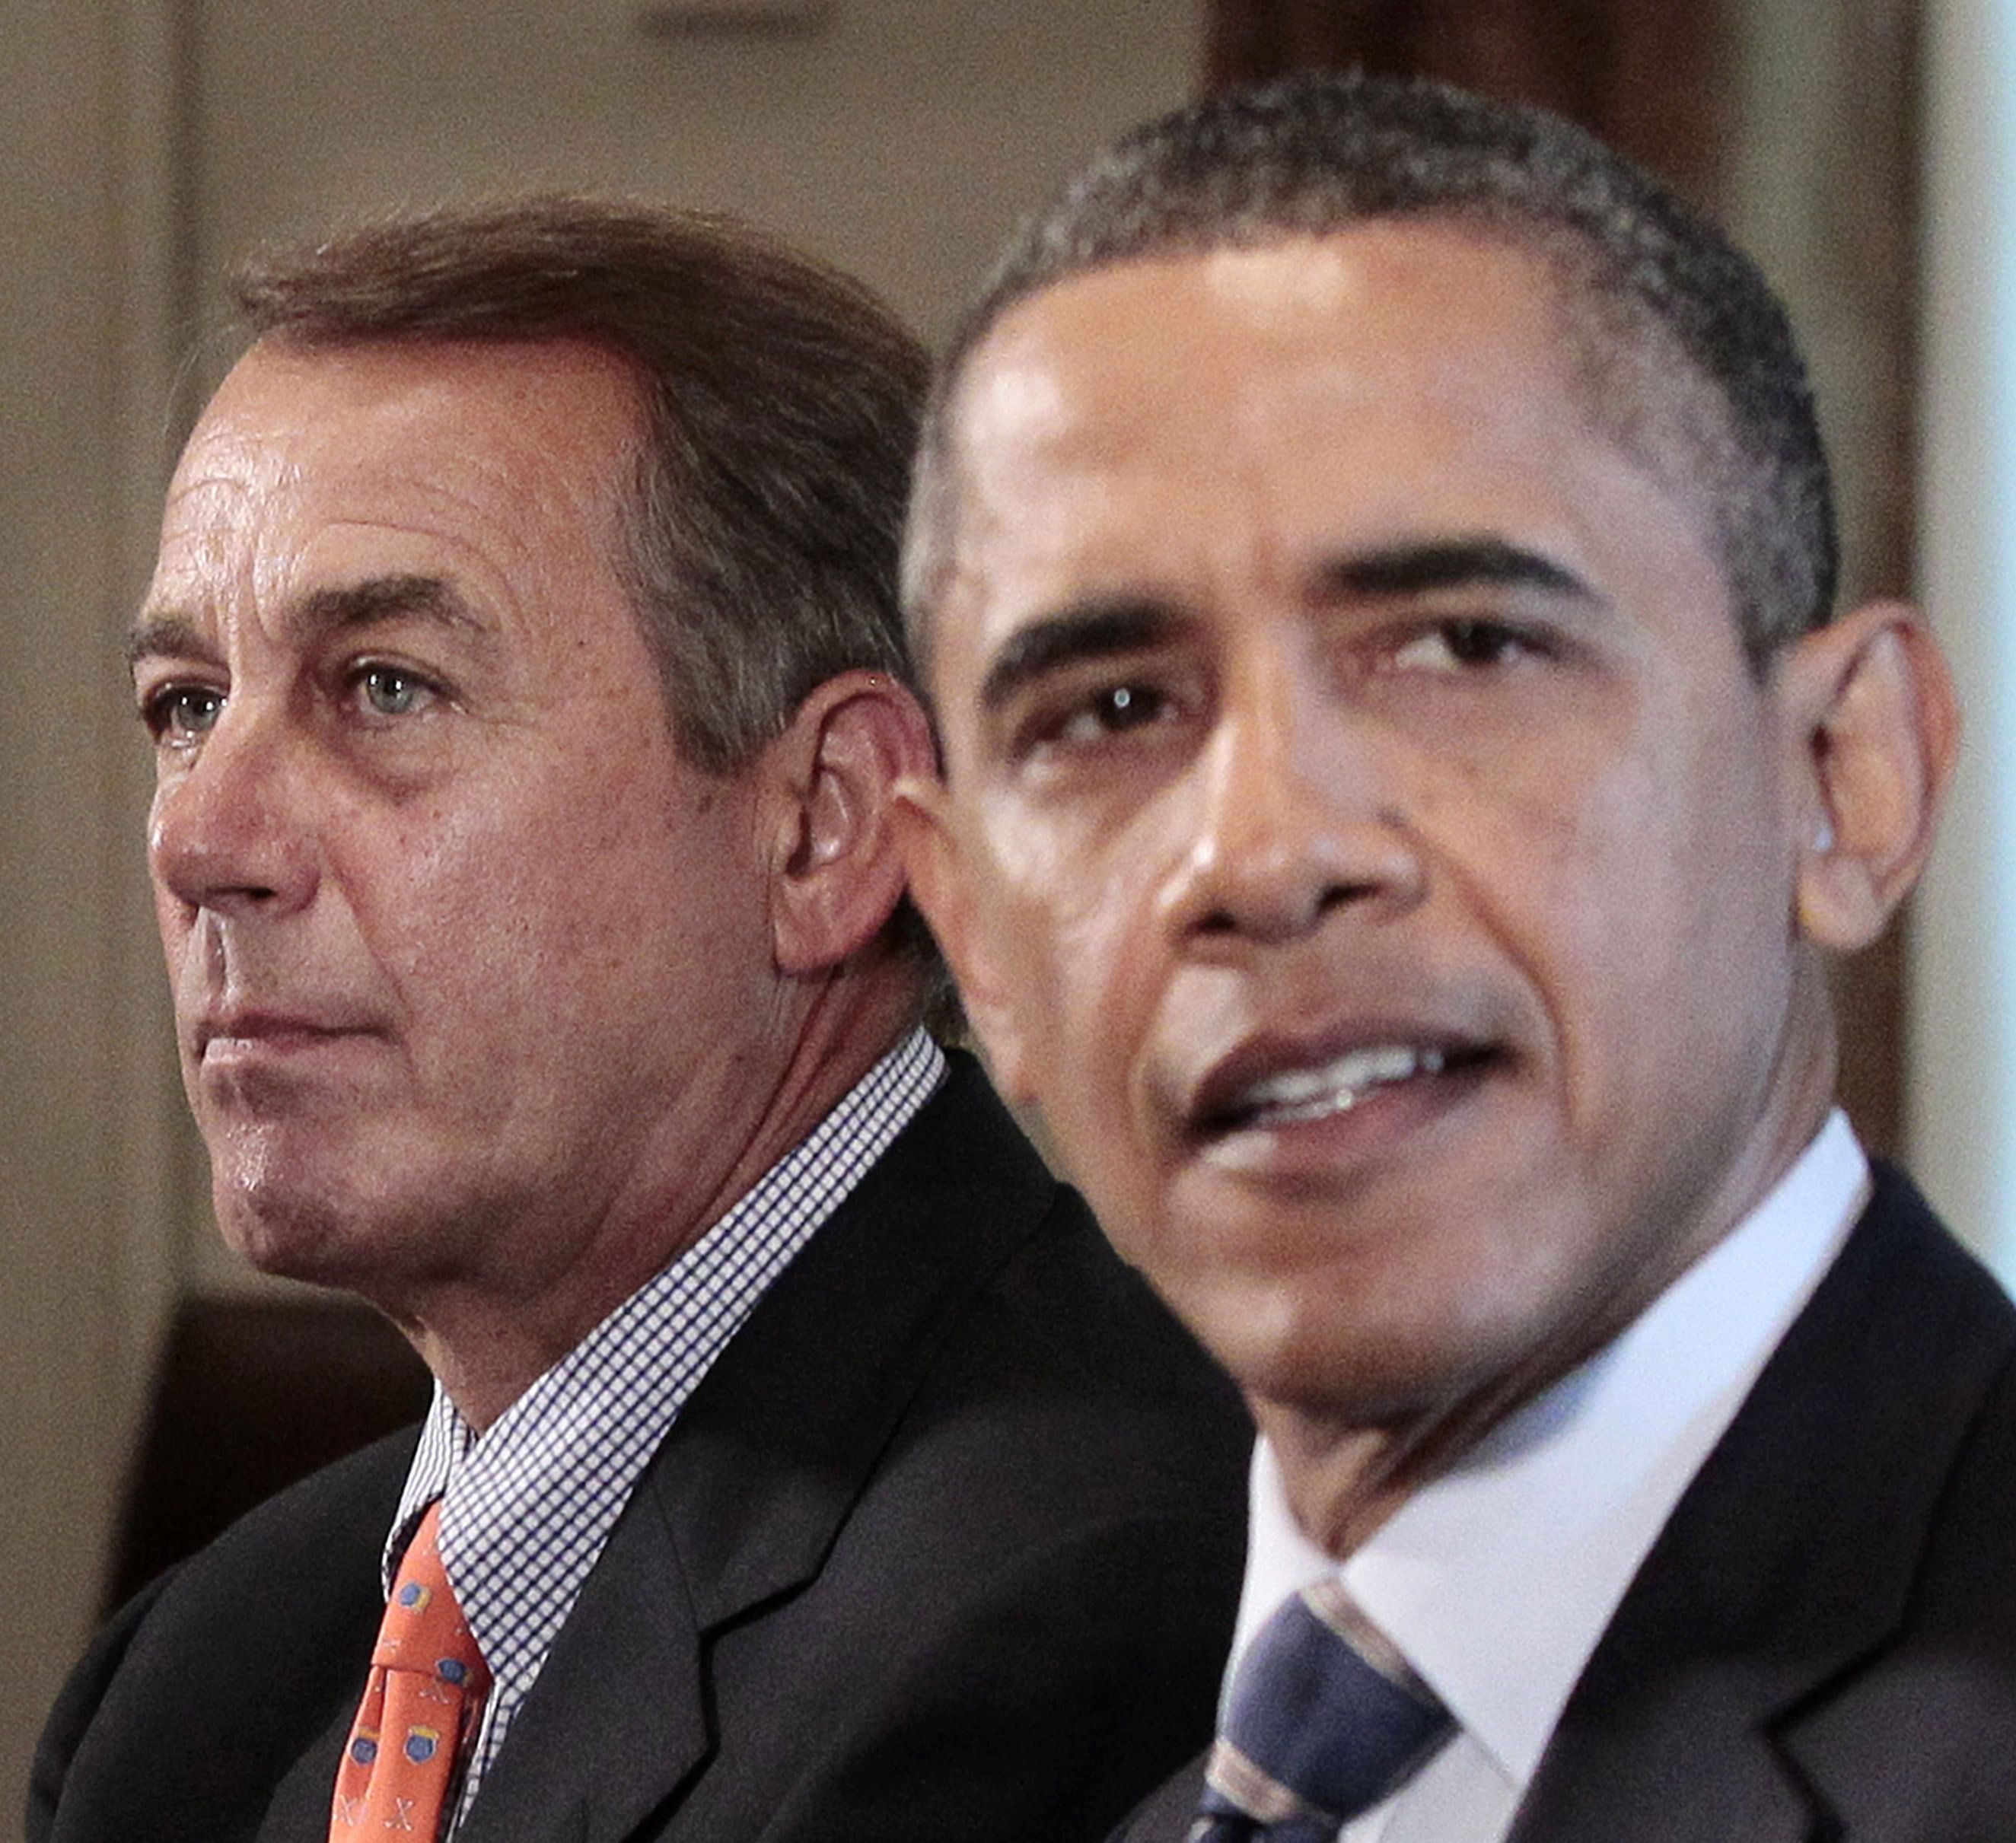 President Barack Obama and House Speaker John Boehner, R-Ohio, have been engaged in intense negotiations on an elusive deal to head off year-end tax increases and spending cuts that threaten the national economy.